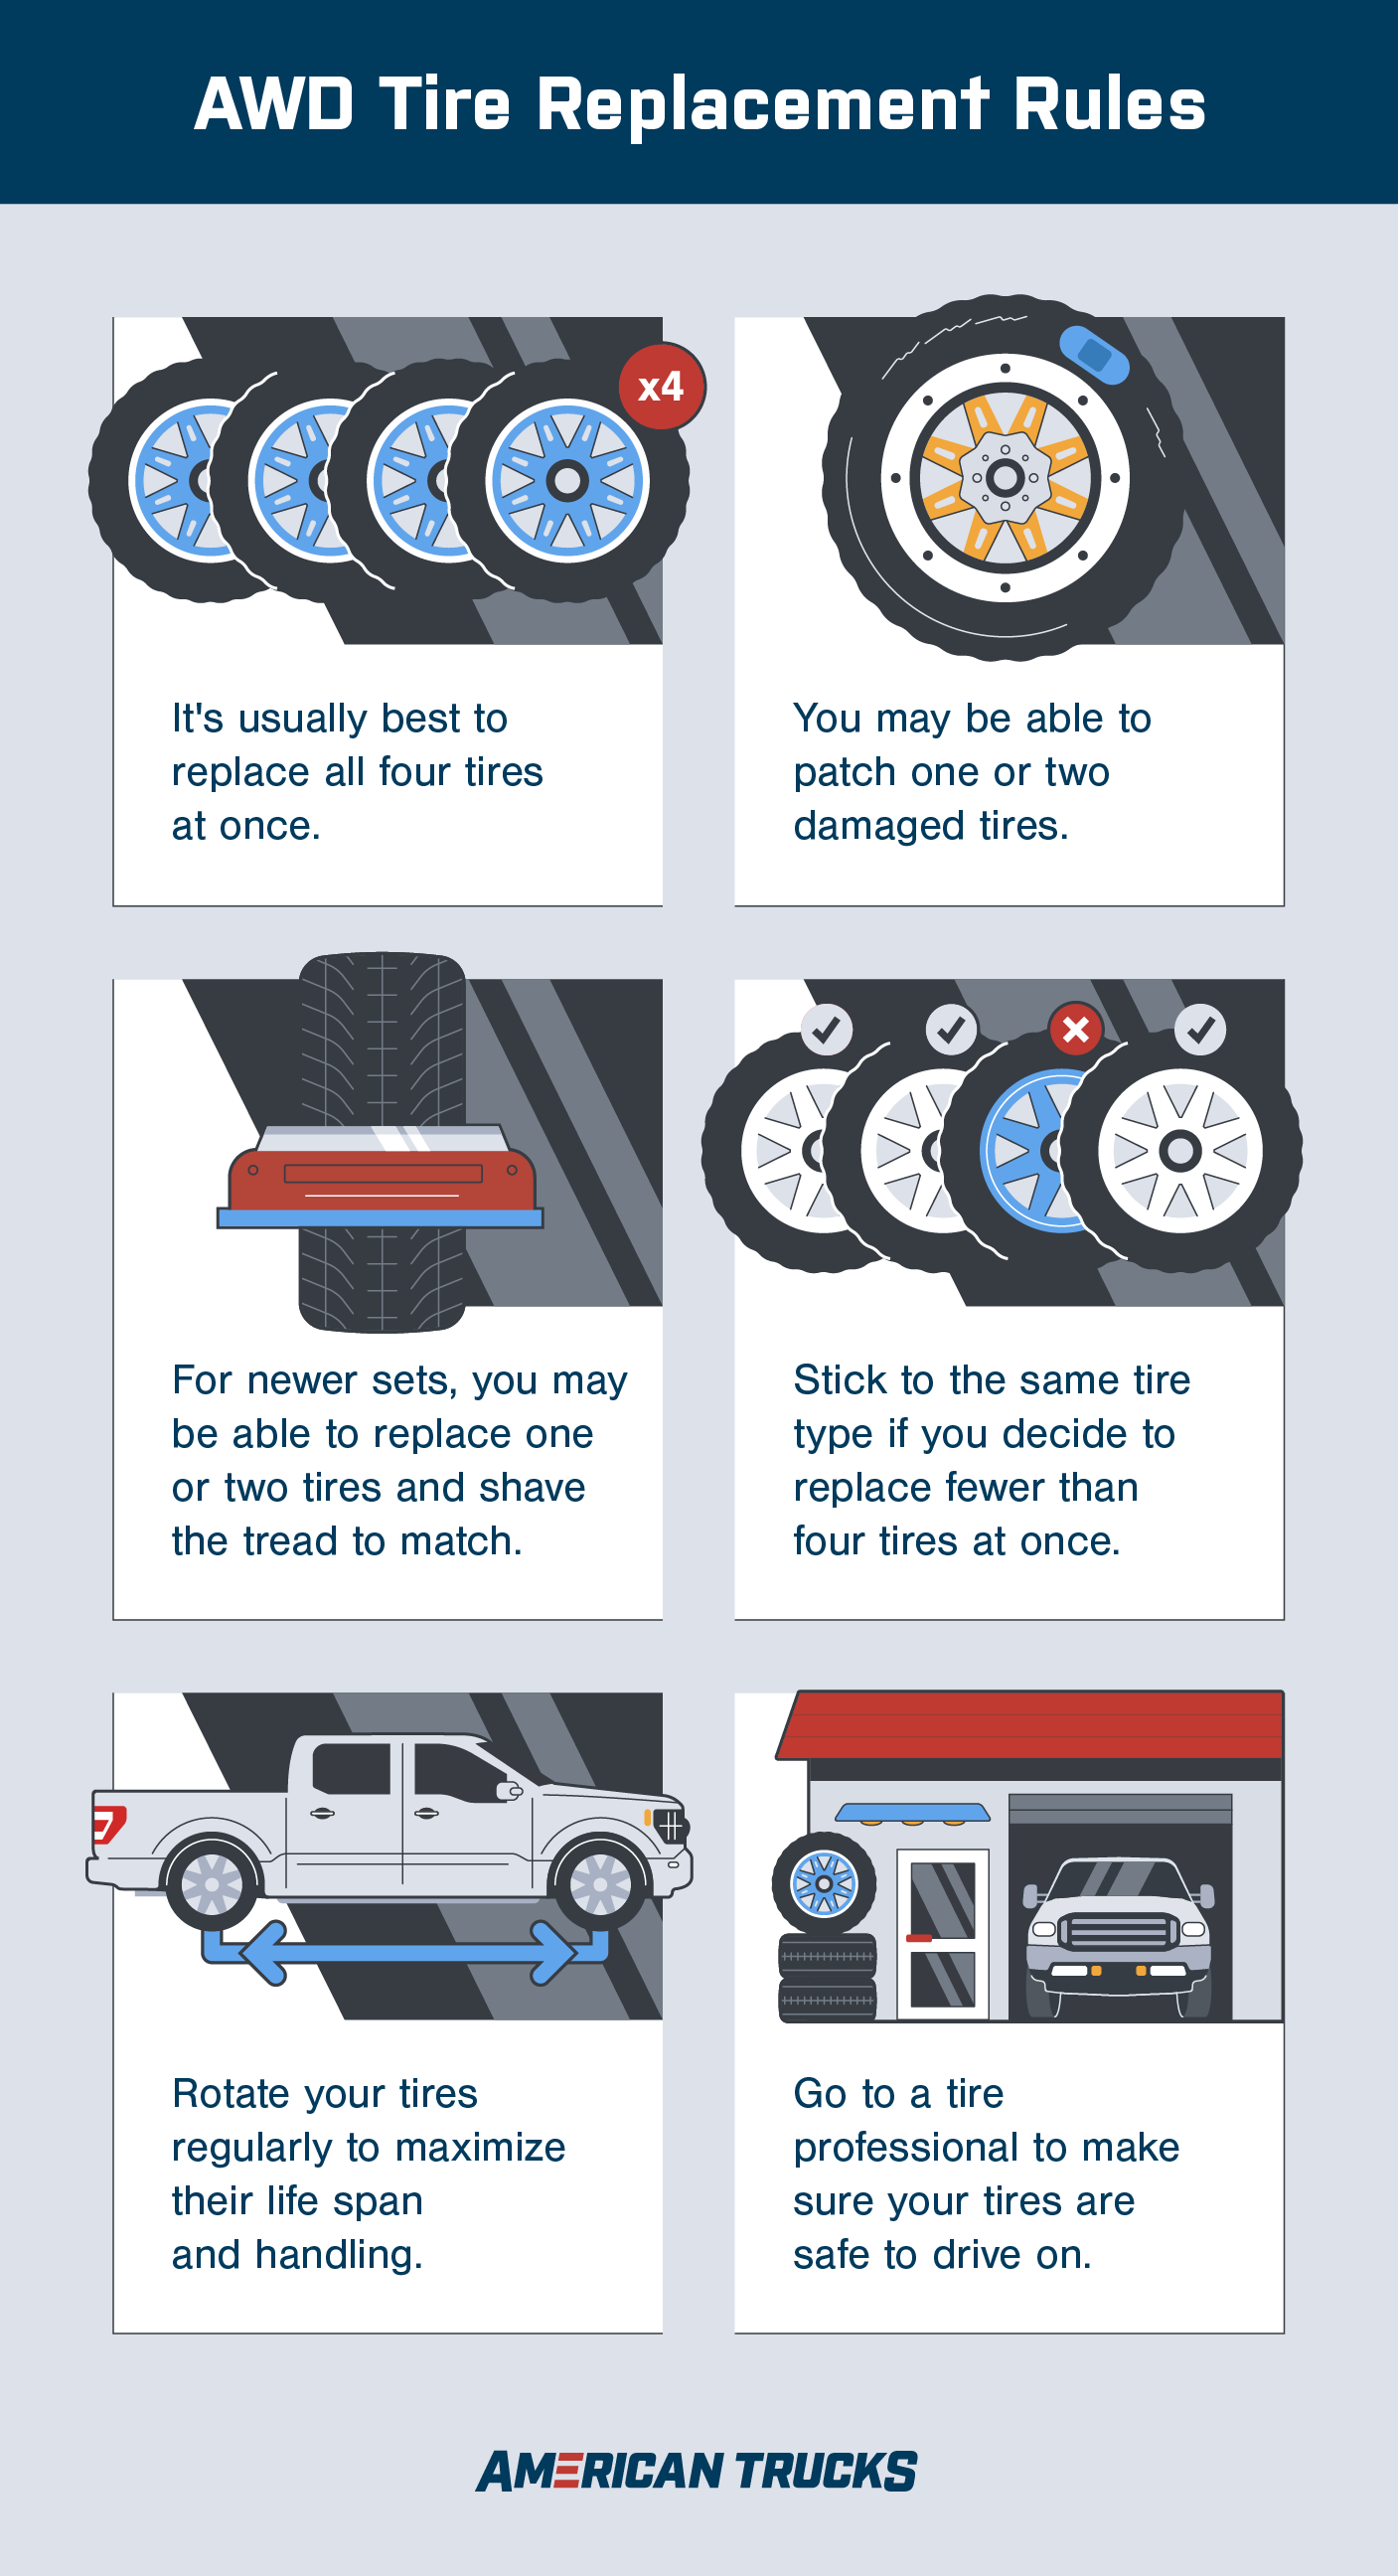 Graphic showing six rules about the AWD tire replacement myth with illustrations of tires.